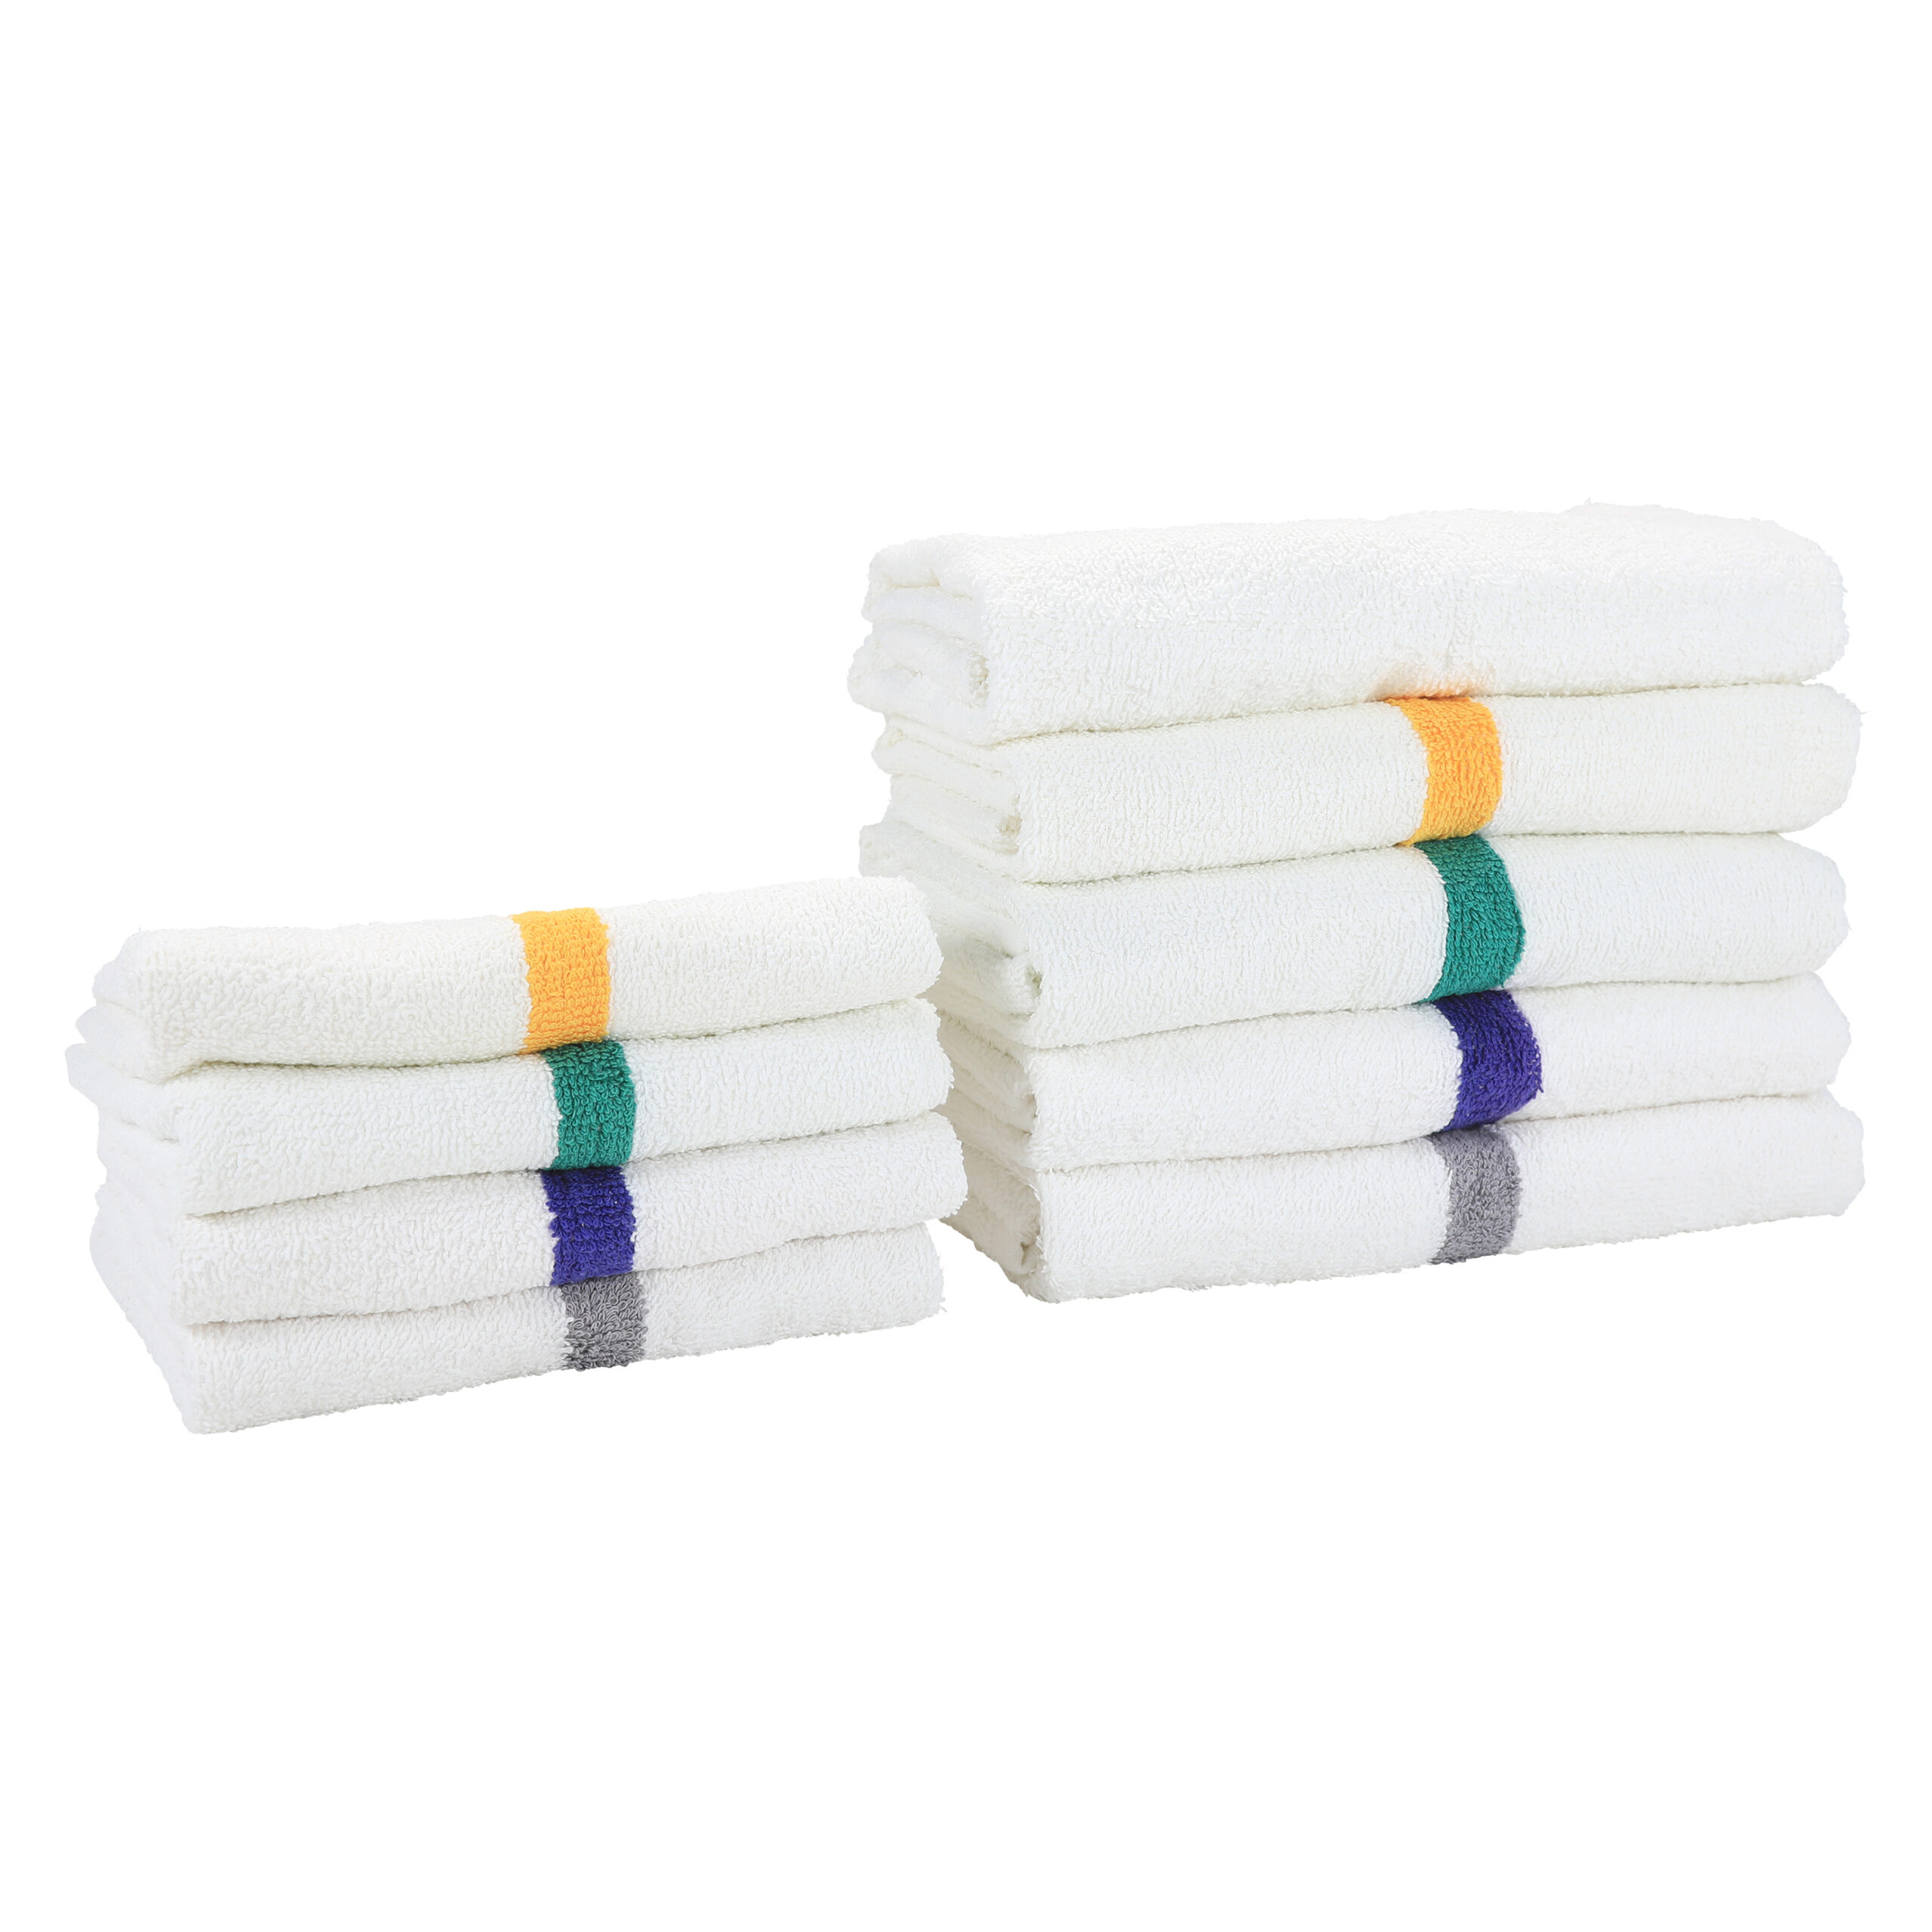 Power Towels Group stacked